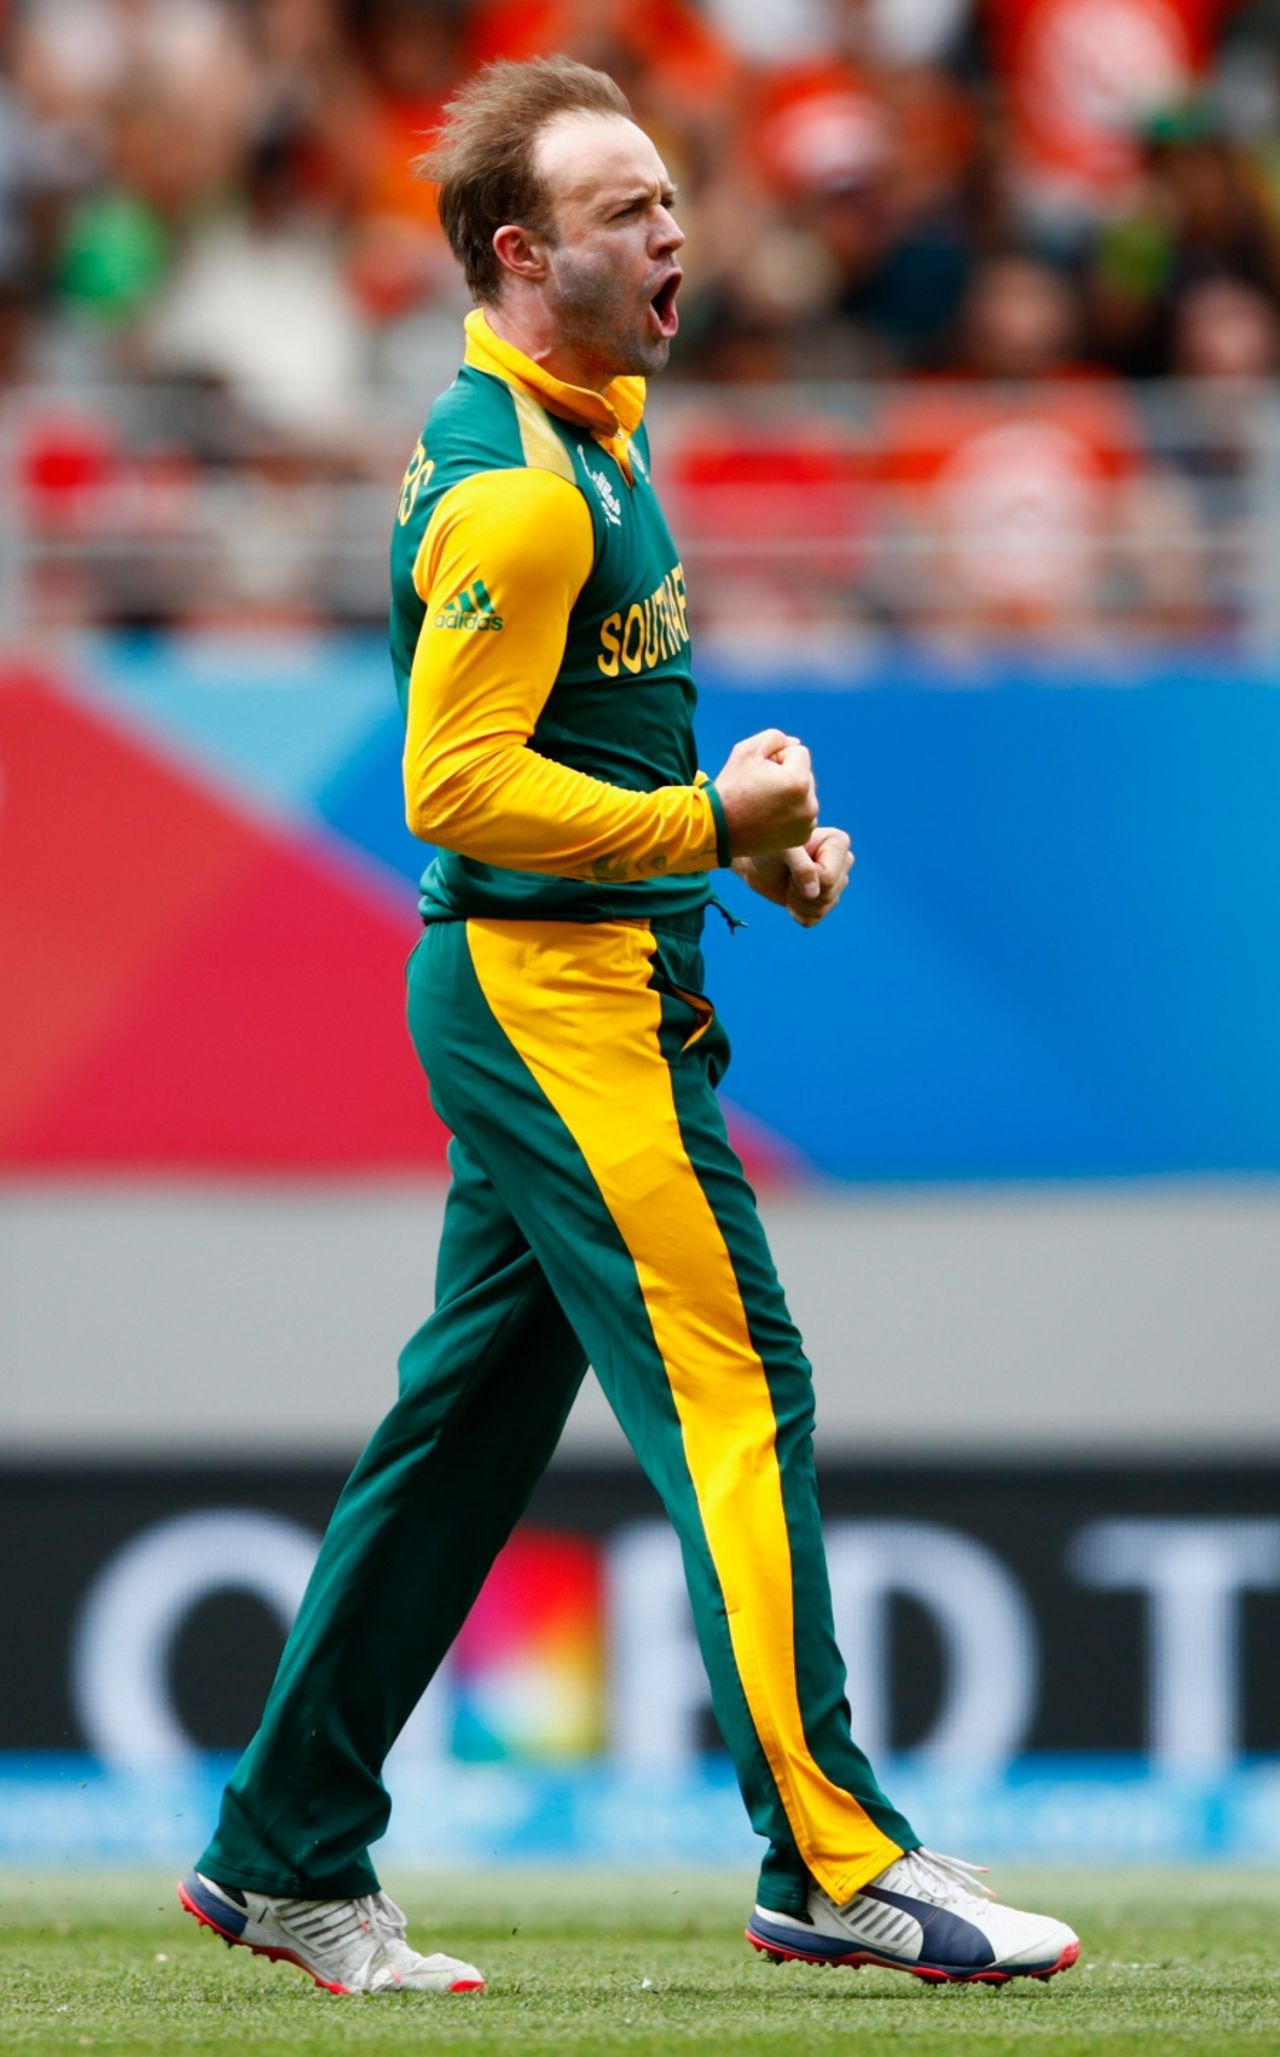 AB de Villiers roars after getting rid of Younis Khan, Pakistan v South Africa, World Cup 2015, Group B, Auckland, March 7, 2015